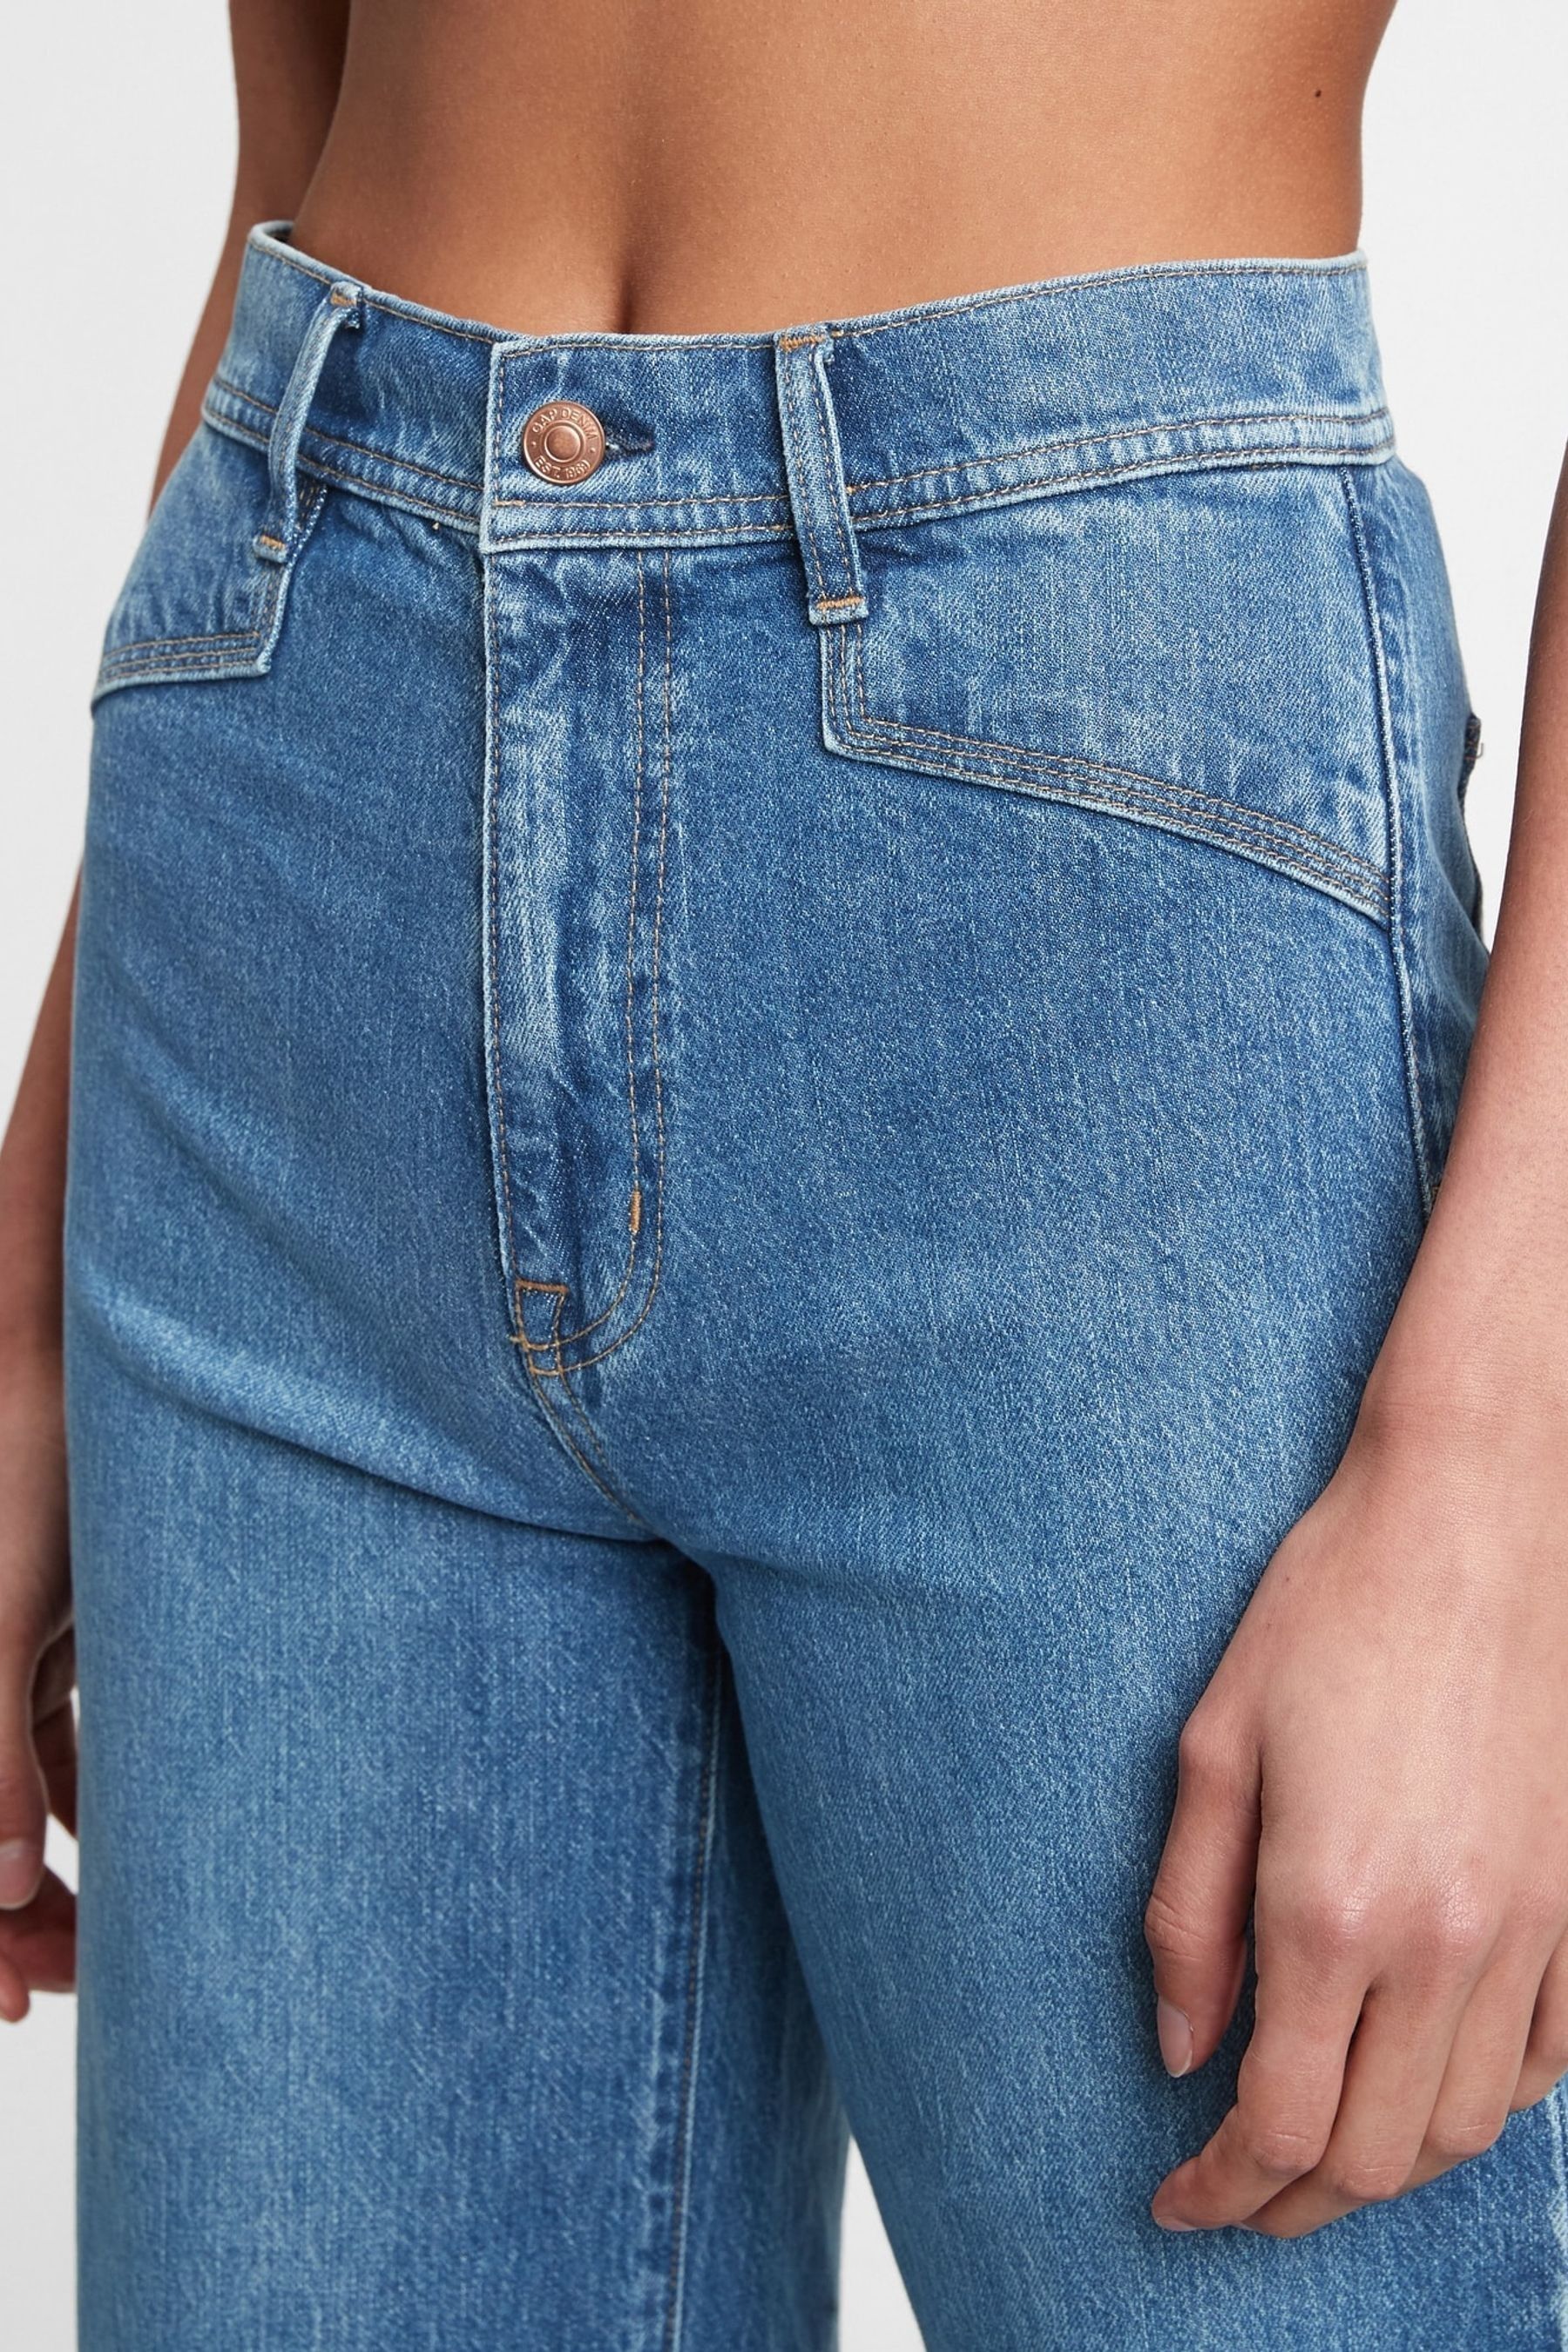 Buy Gap High Waisted Sky Wide Leg Jeans from the Gap online shop